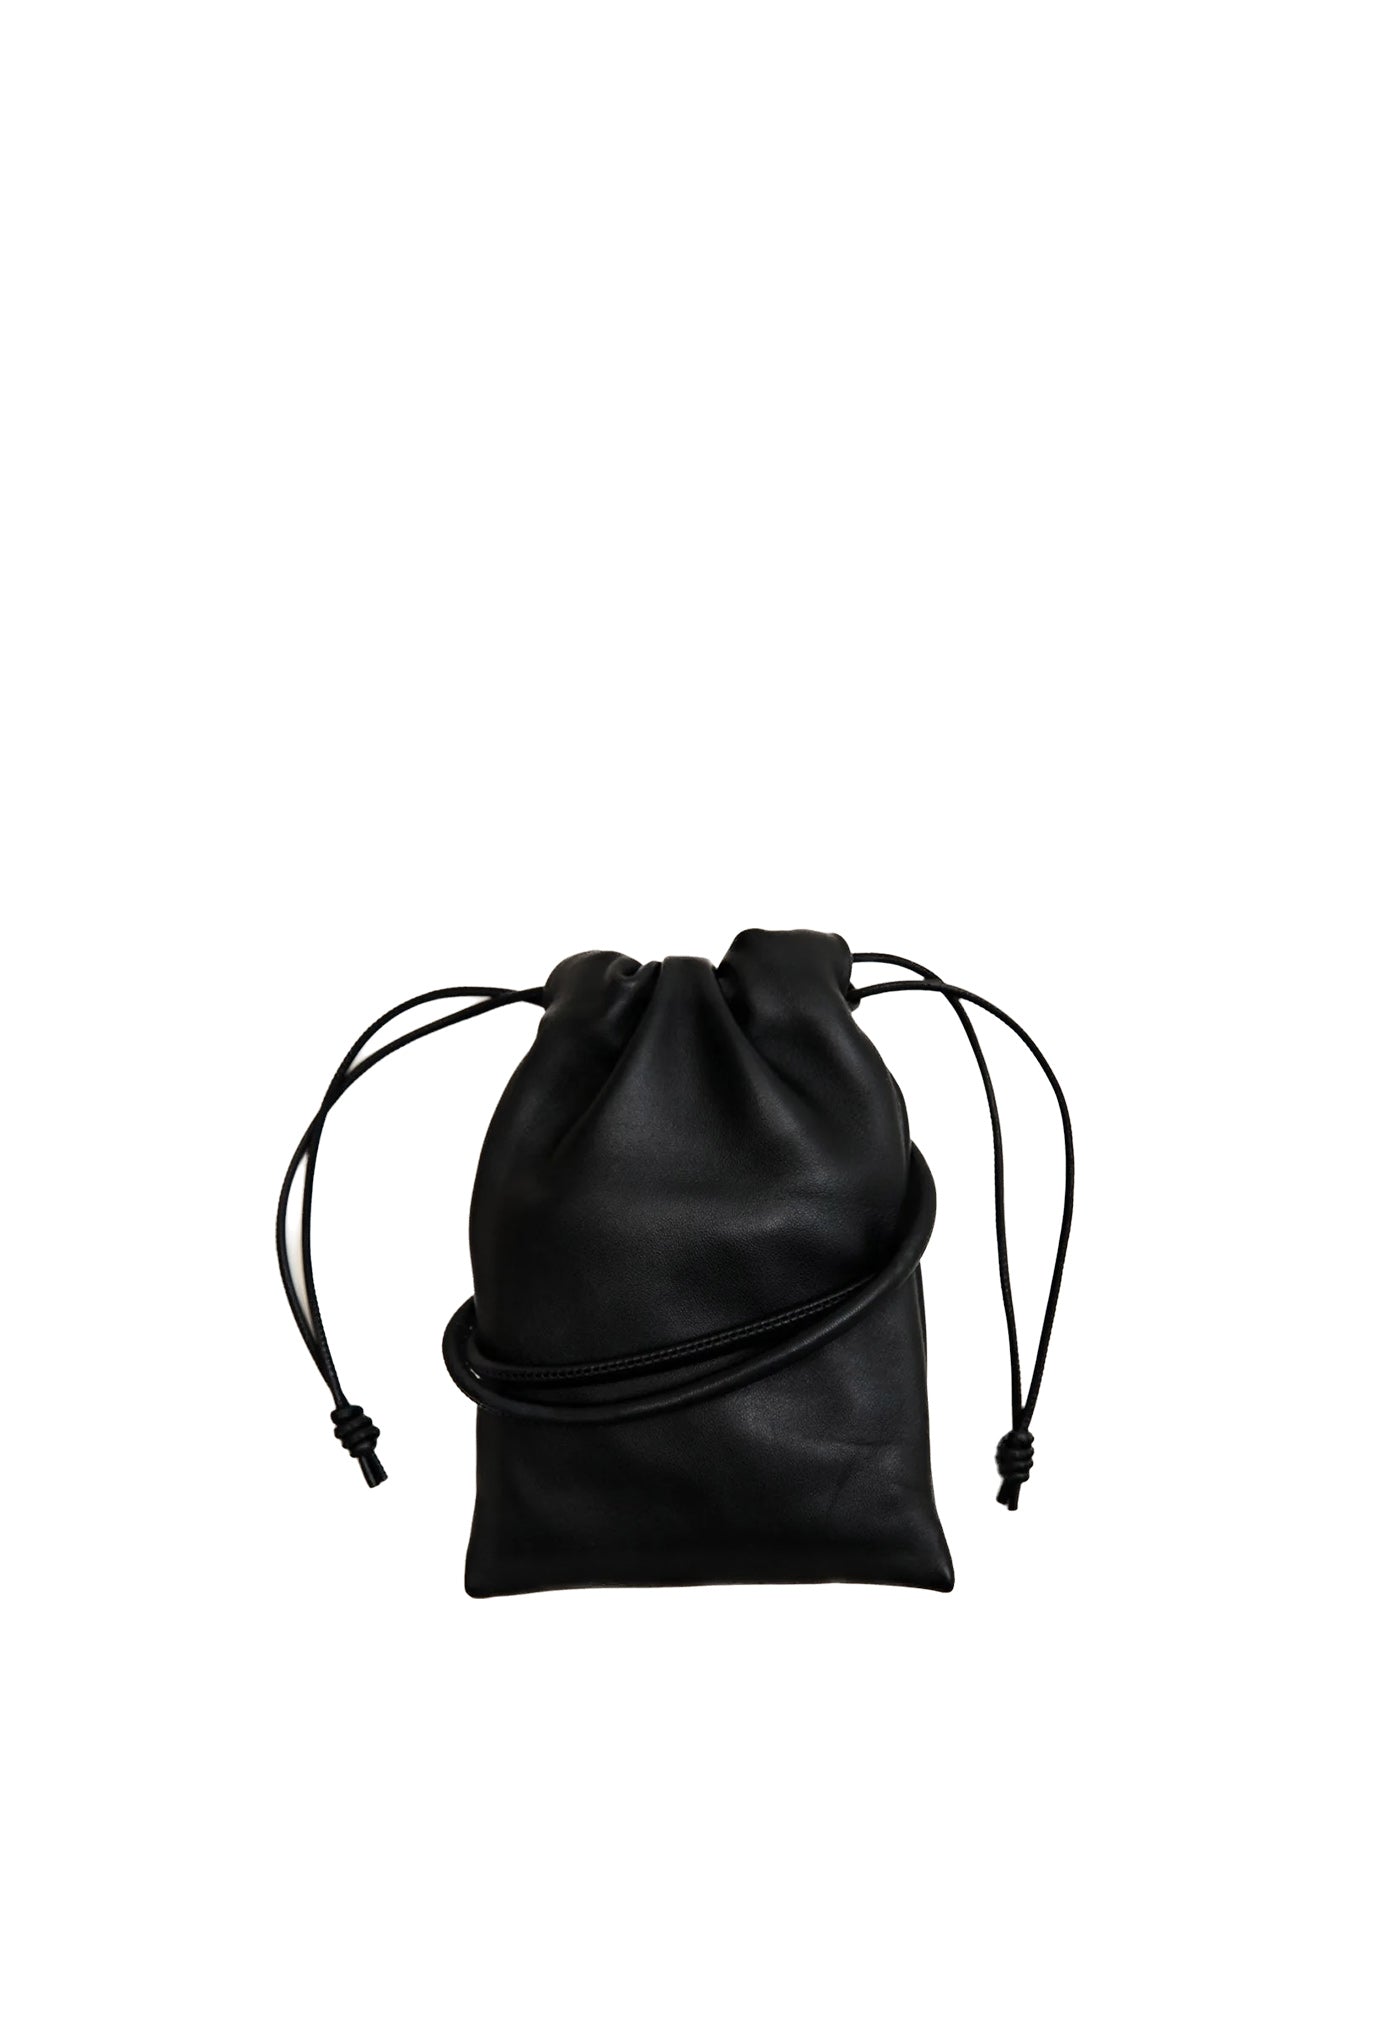 Soft Drawstring Pouch - Black sold by Angel Divine